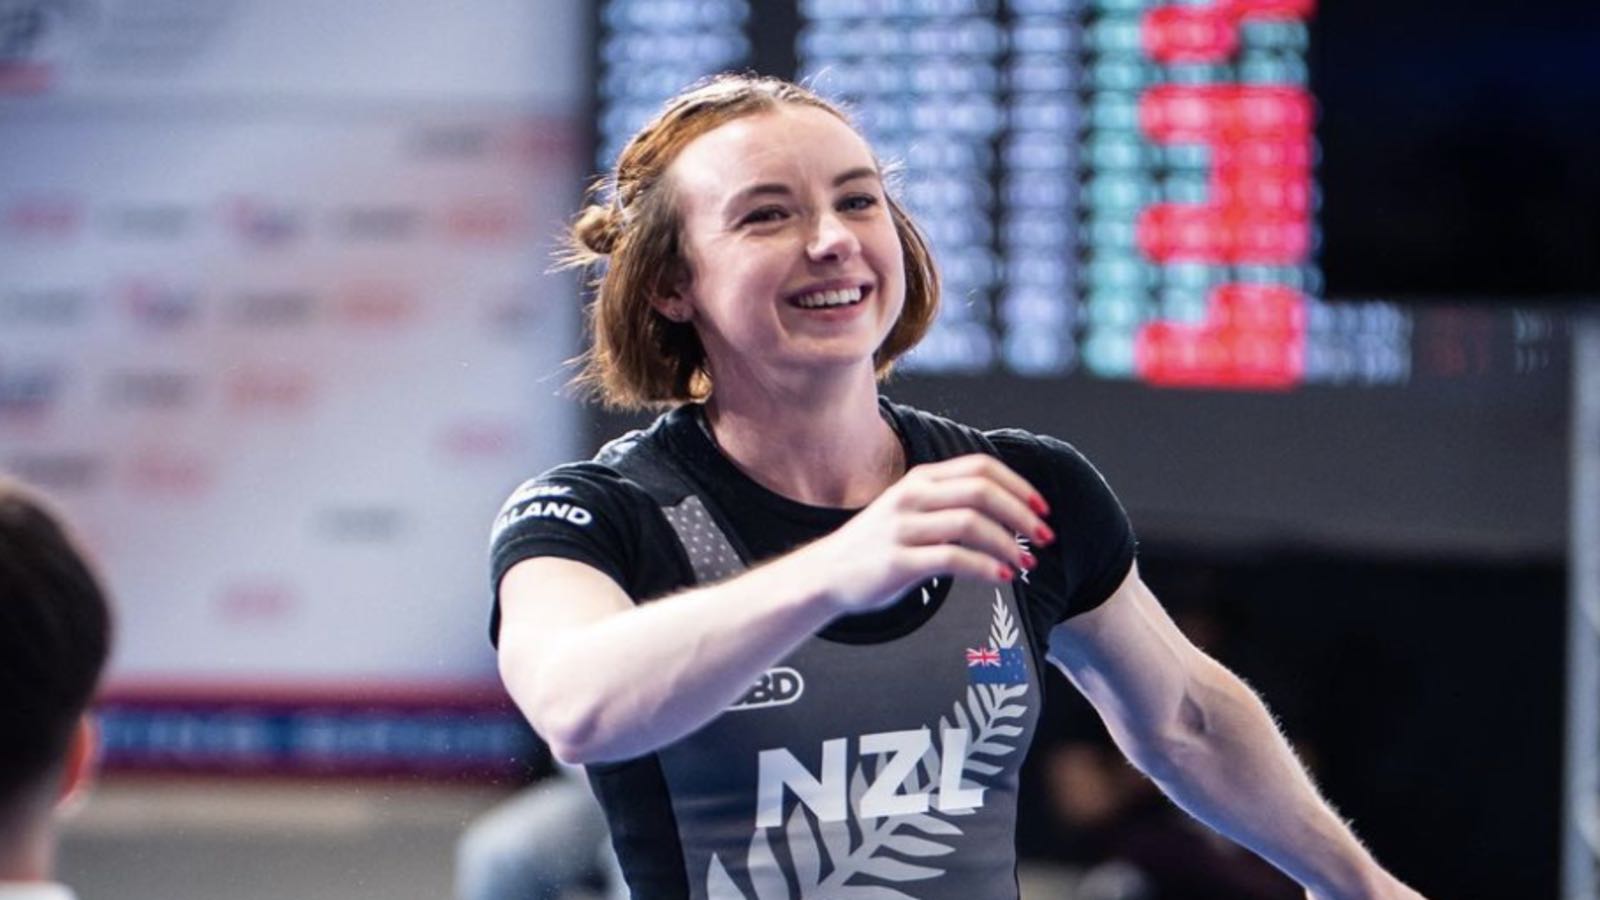 evie-corrigan-(52kg)-wins-first-ipf-world-title-in-second-open-appearance-–-breaking-muscle